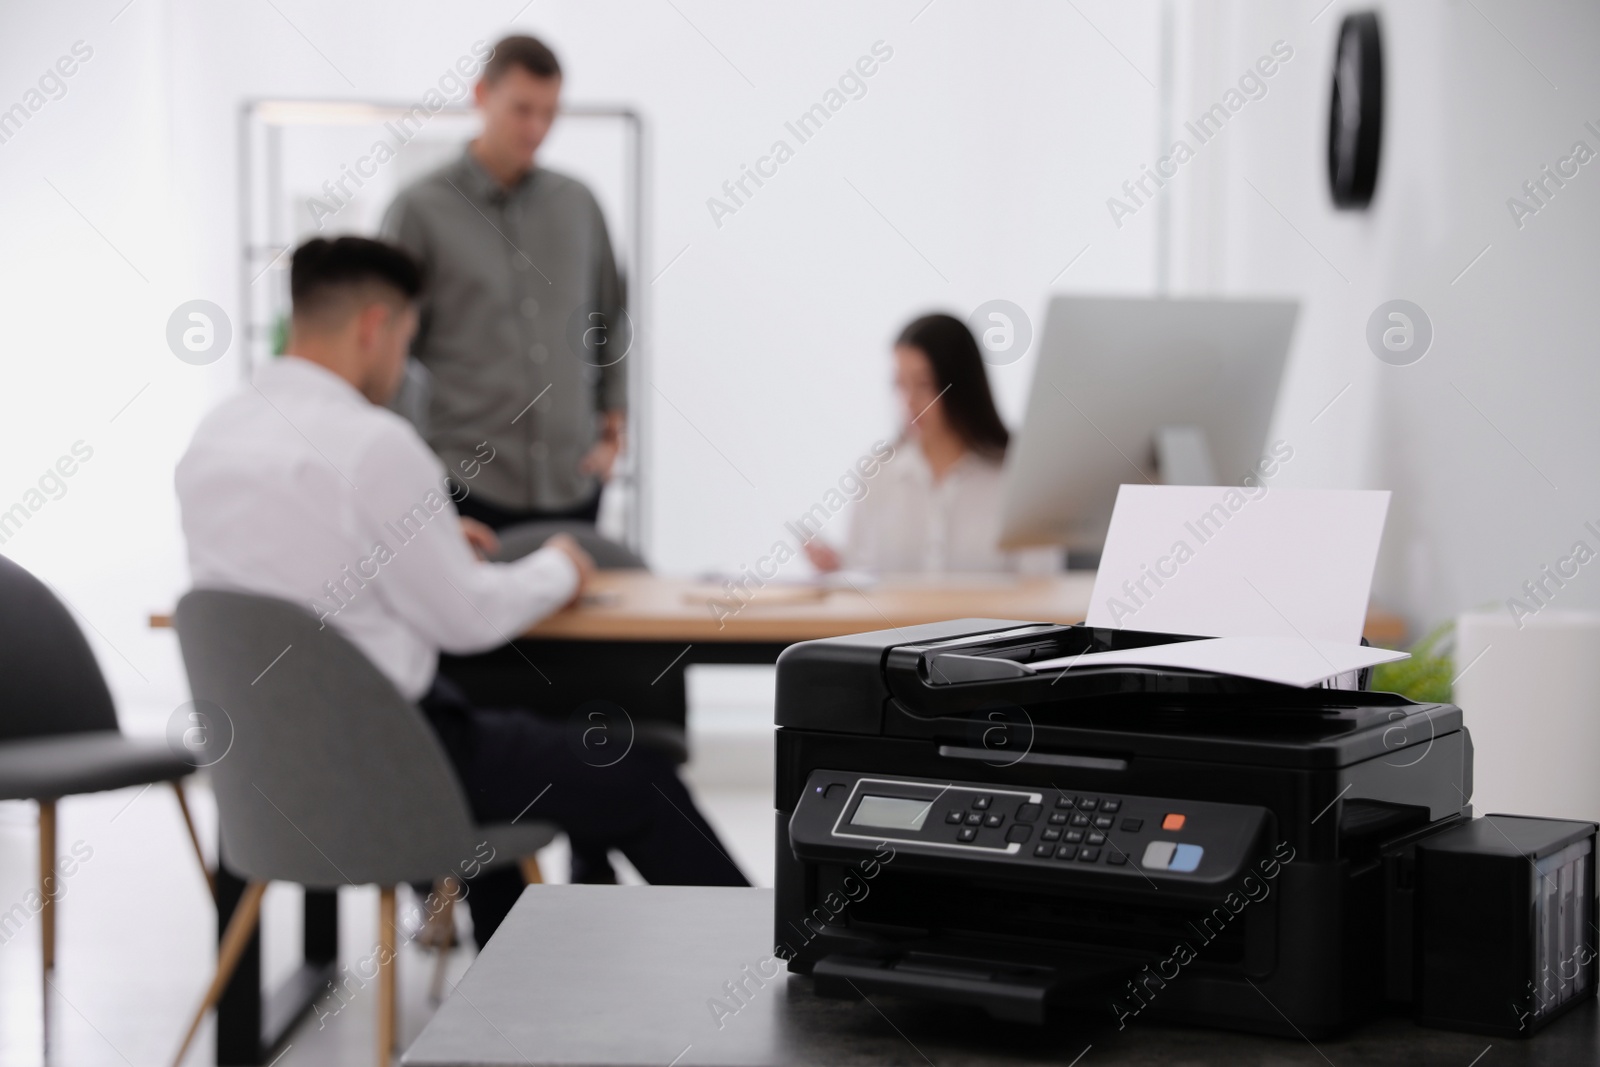 Photo of New modern printer on table in office. Space for text